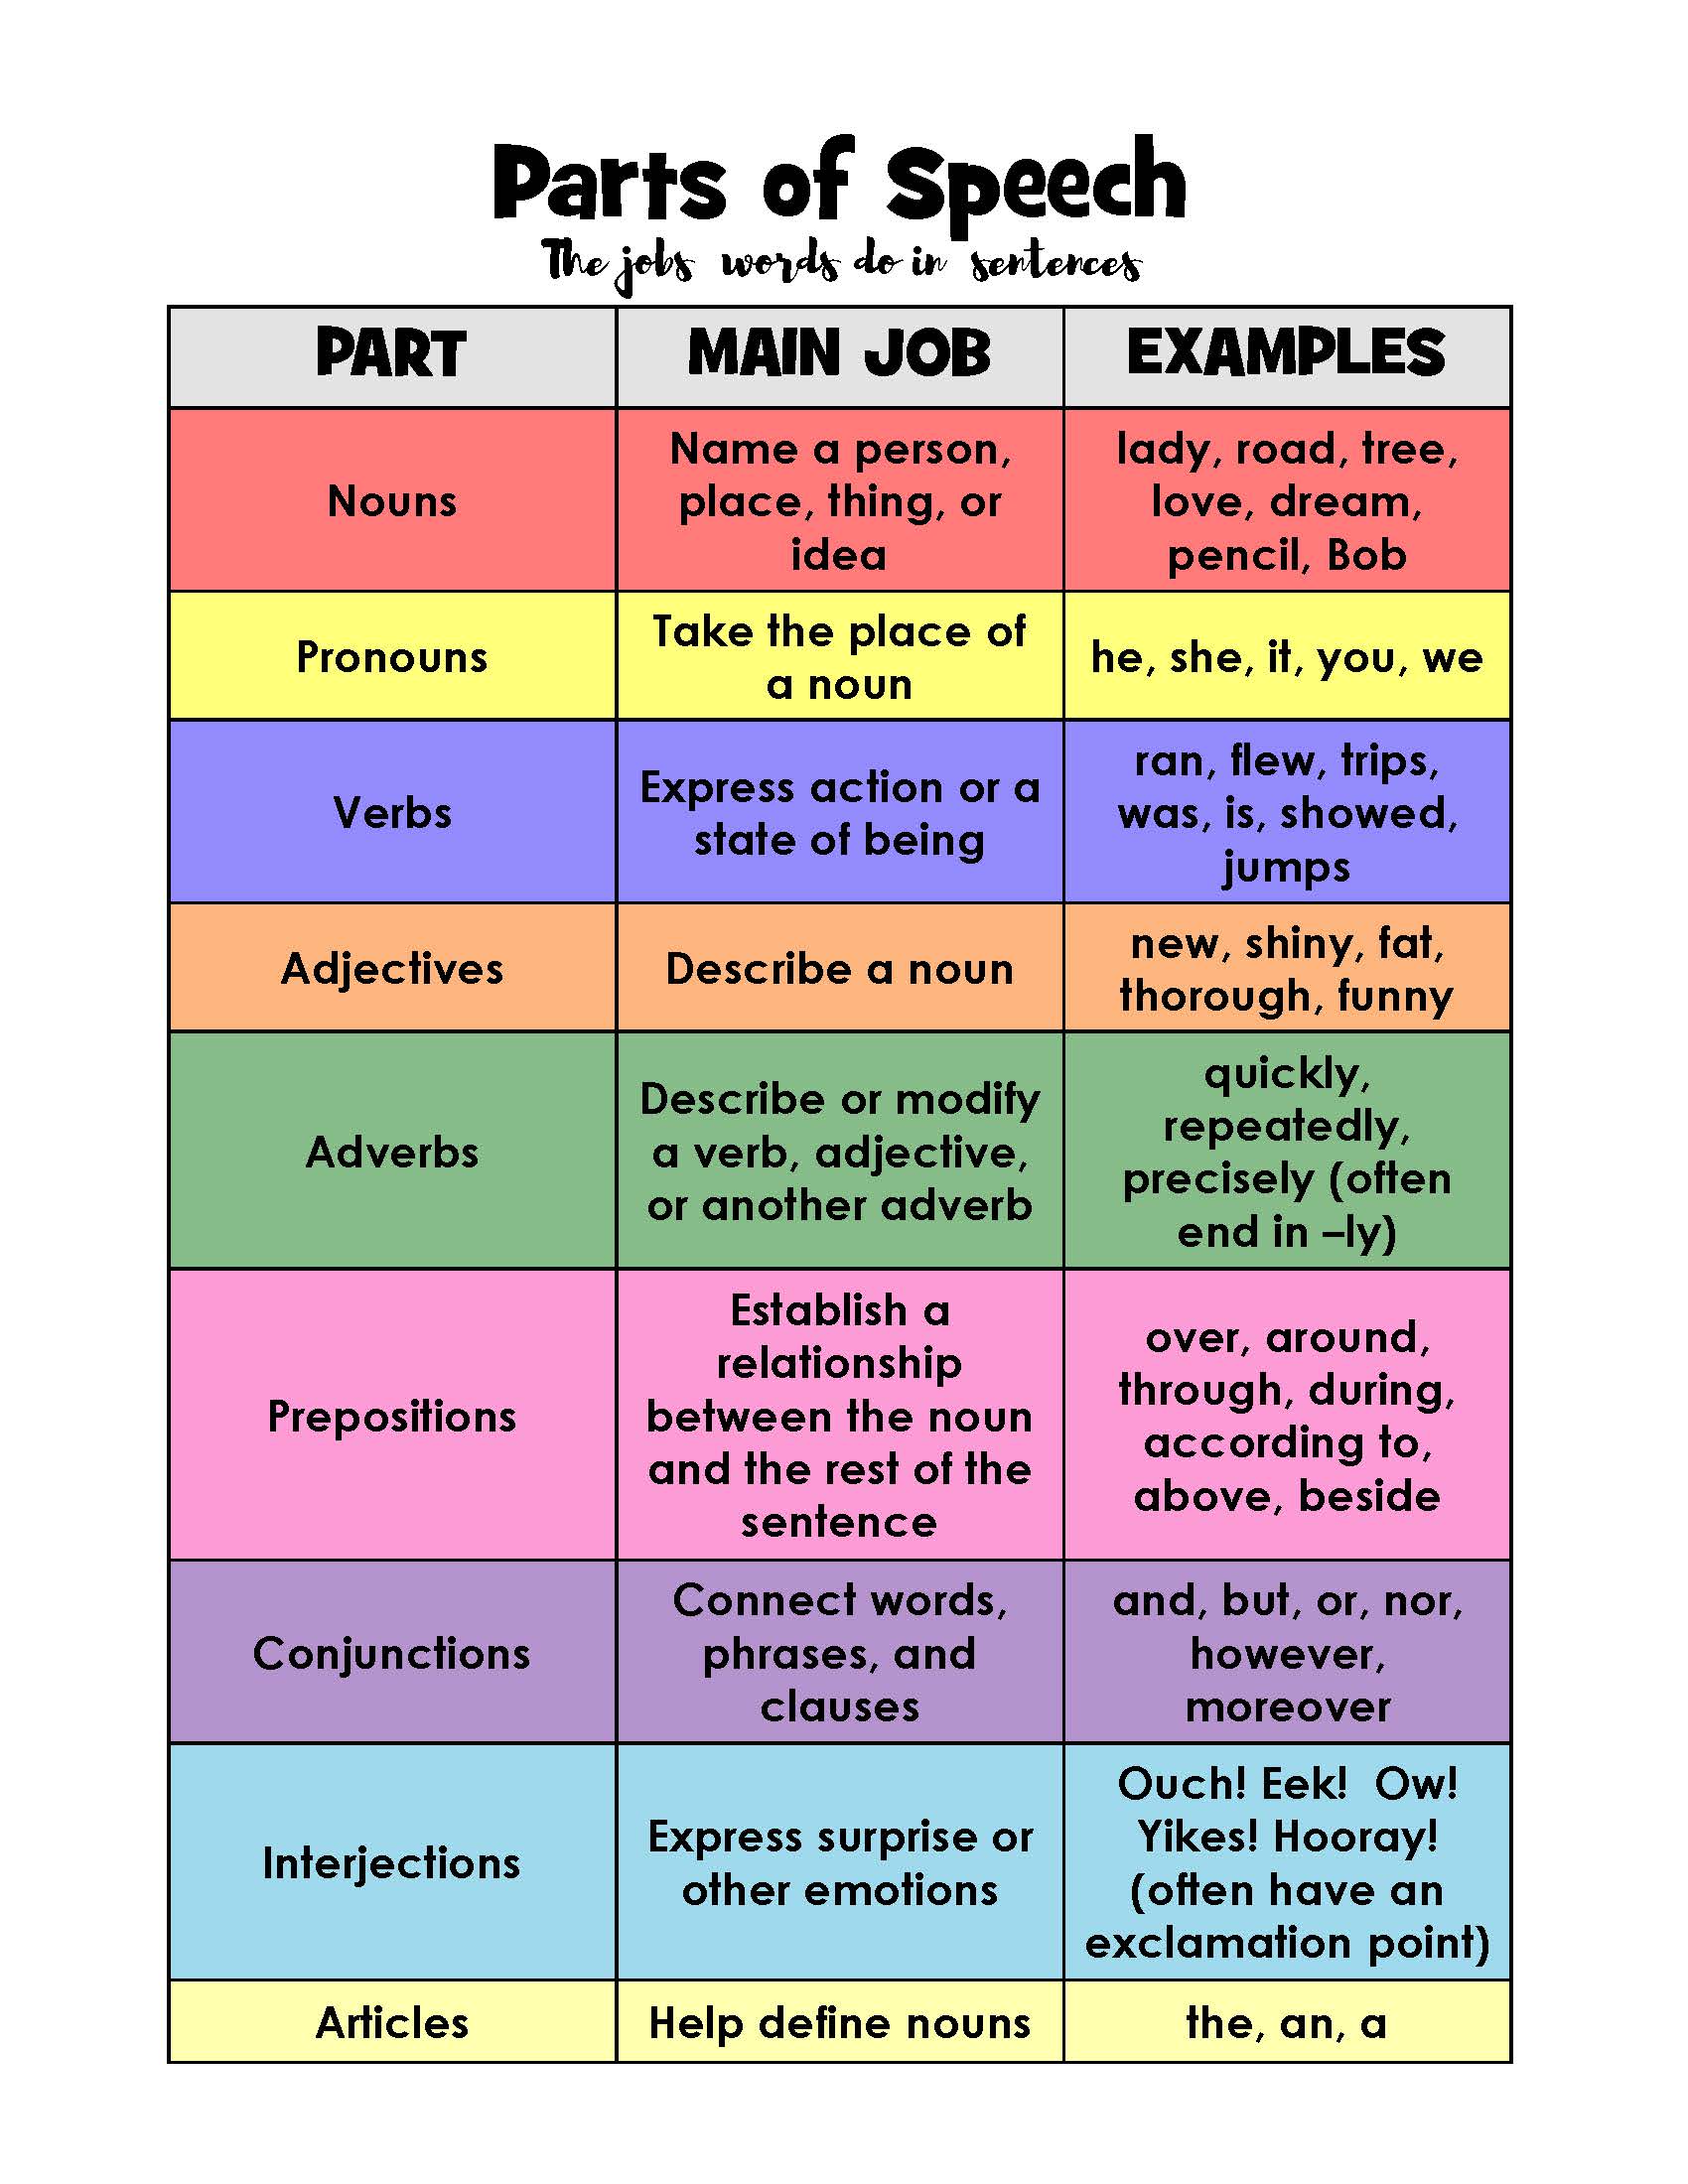 Parts of Speech Activities - Layers of Learning